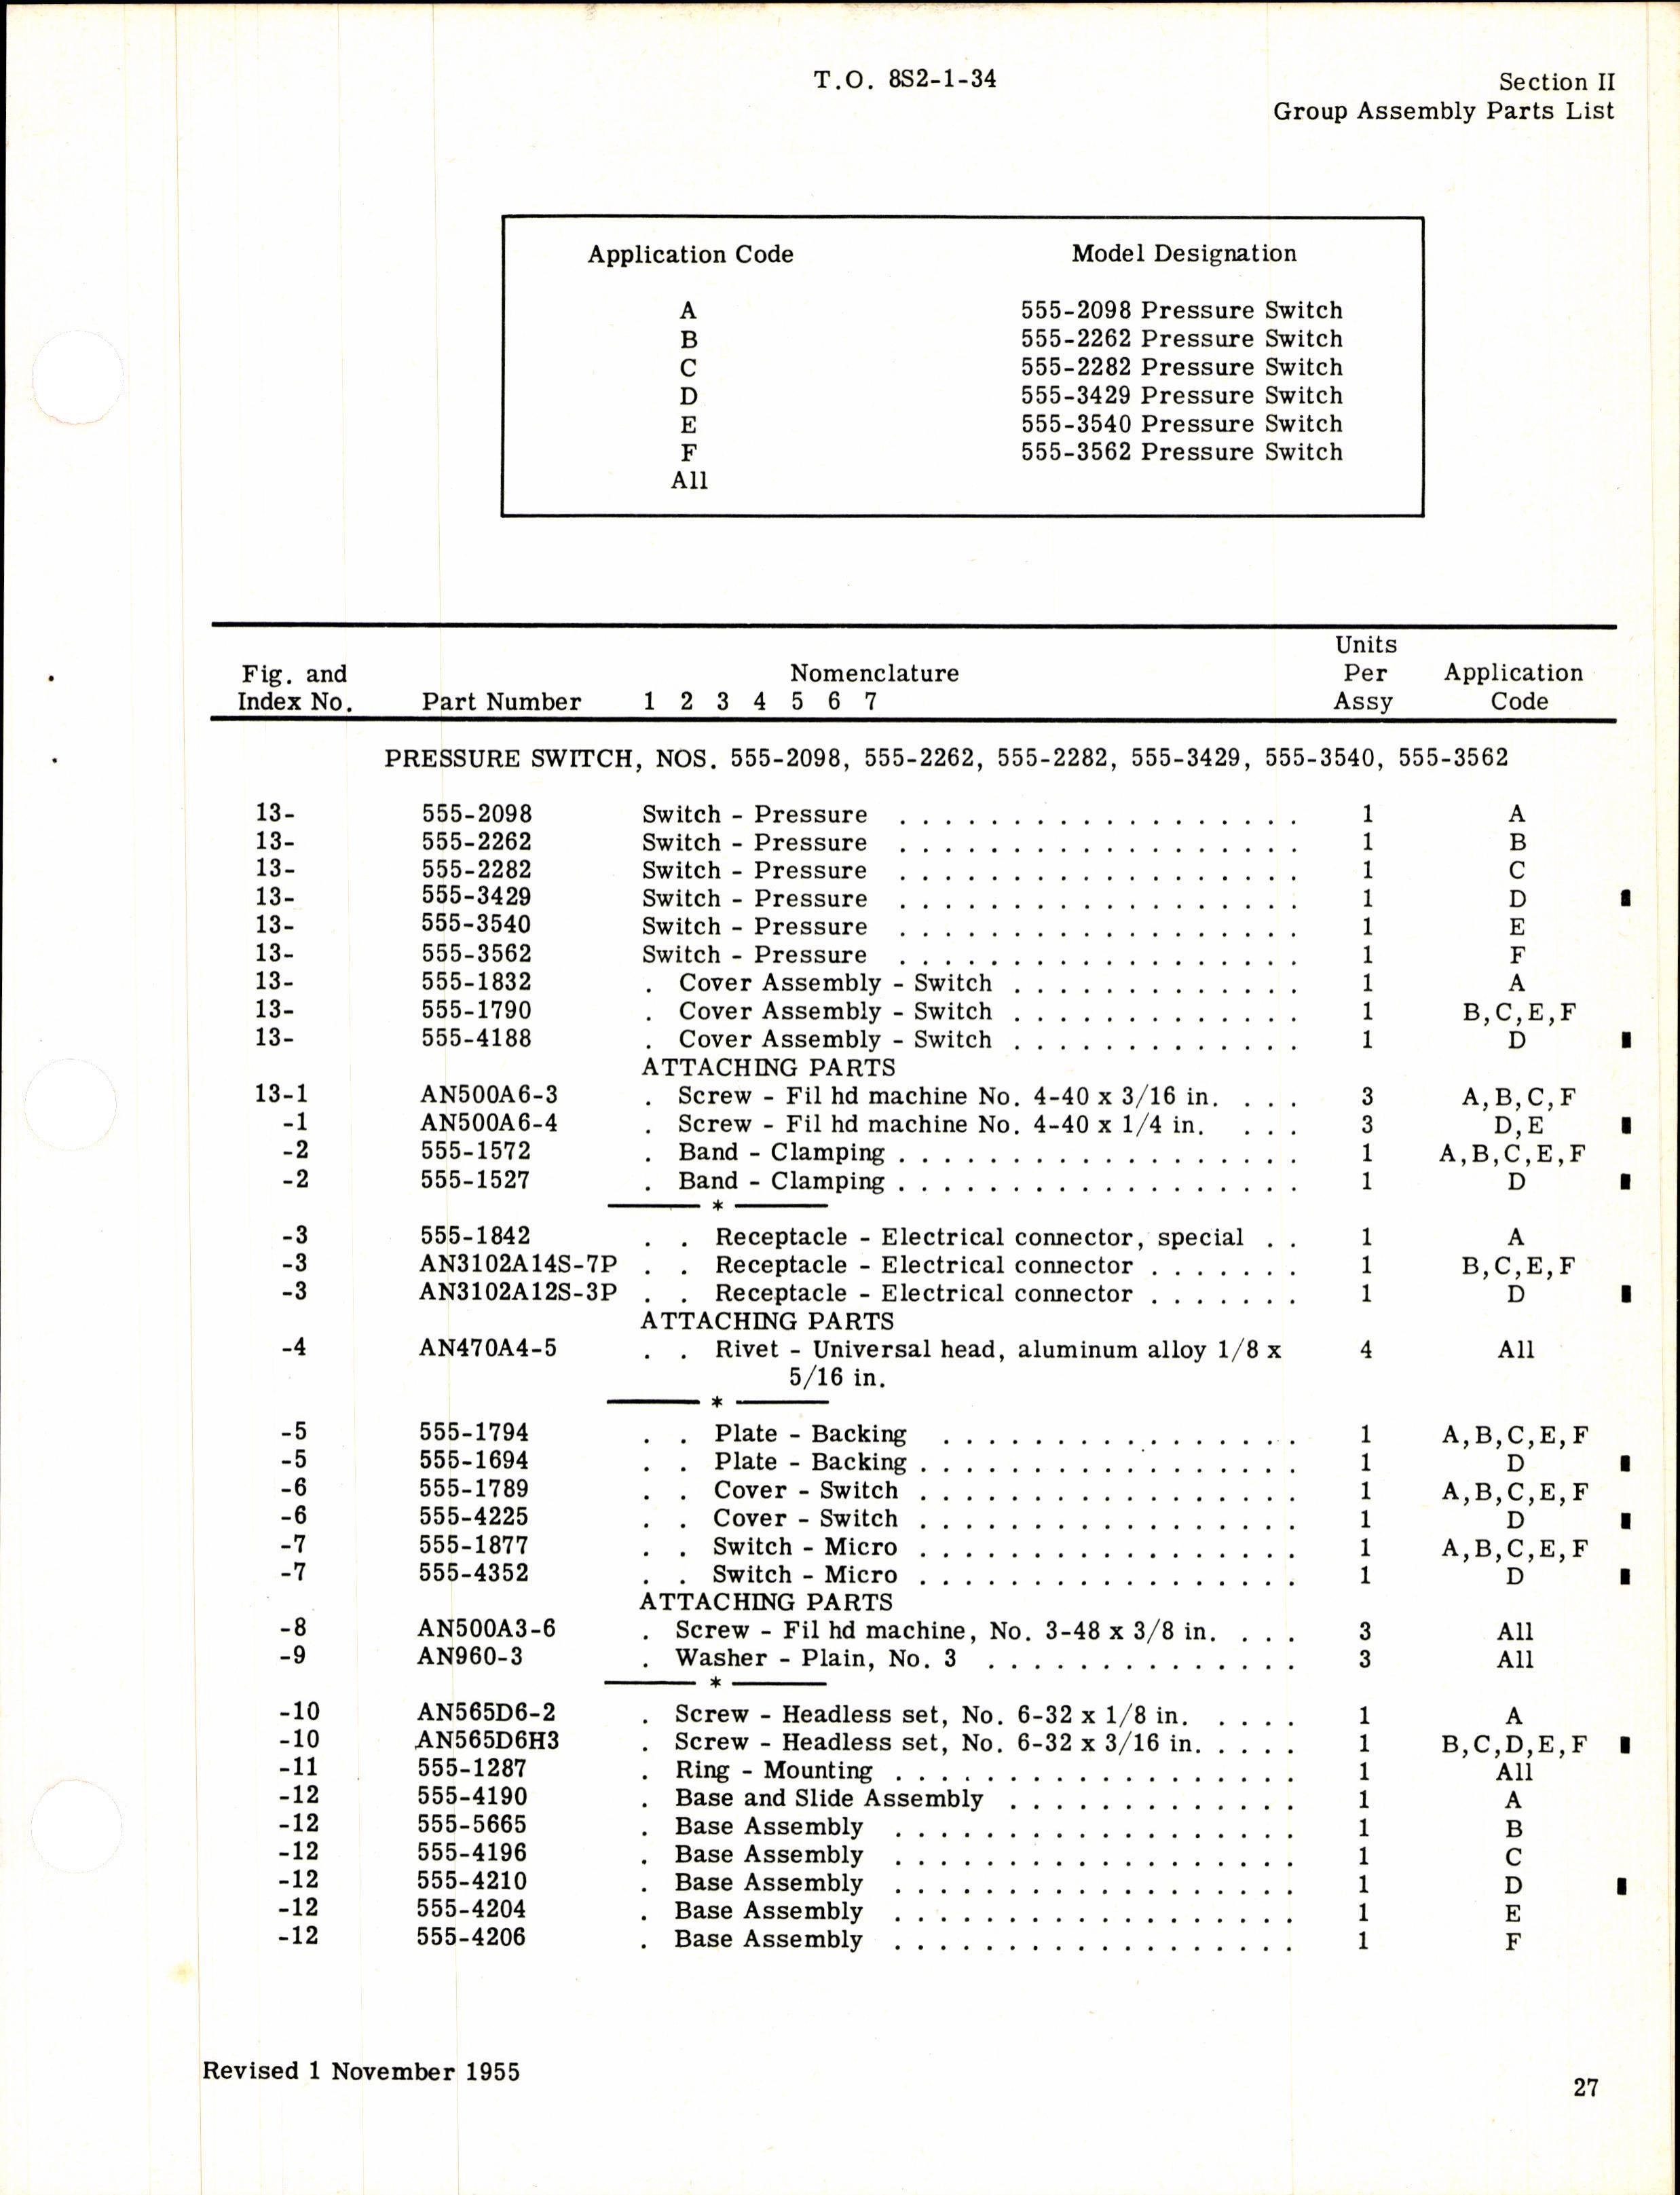 Sample page 7 from AirCorps Library document: Parts Catalog for Cook Pressure Control Switches